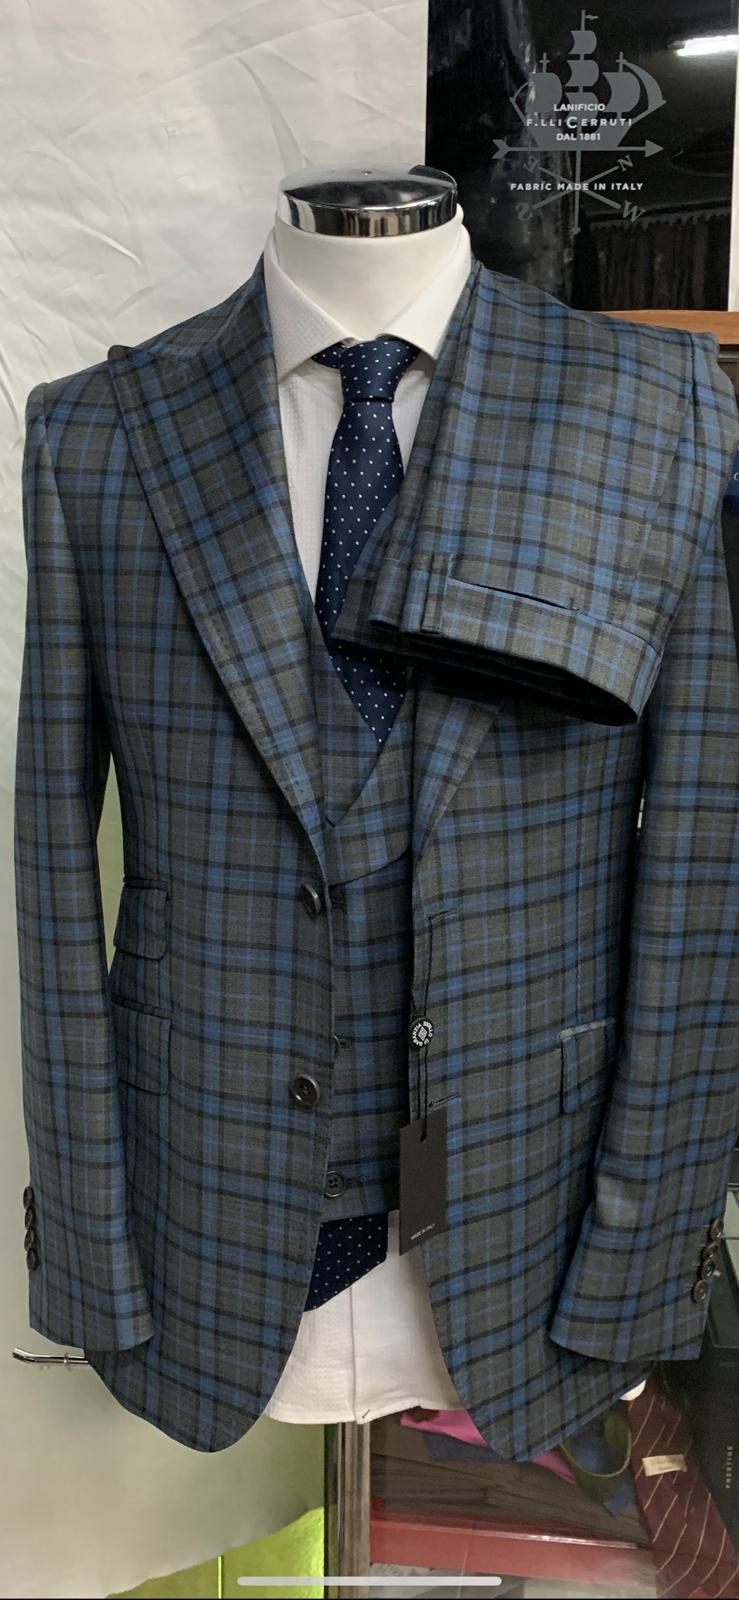 Grey/blue plaid super 150 Cerruti 3 piece wool suit with double breasted vest. Double 5 inch Tom Ford peak lapel, double vents, ticket pocket. Available in sizes: 36 to 52 regular